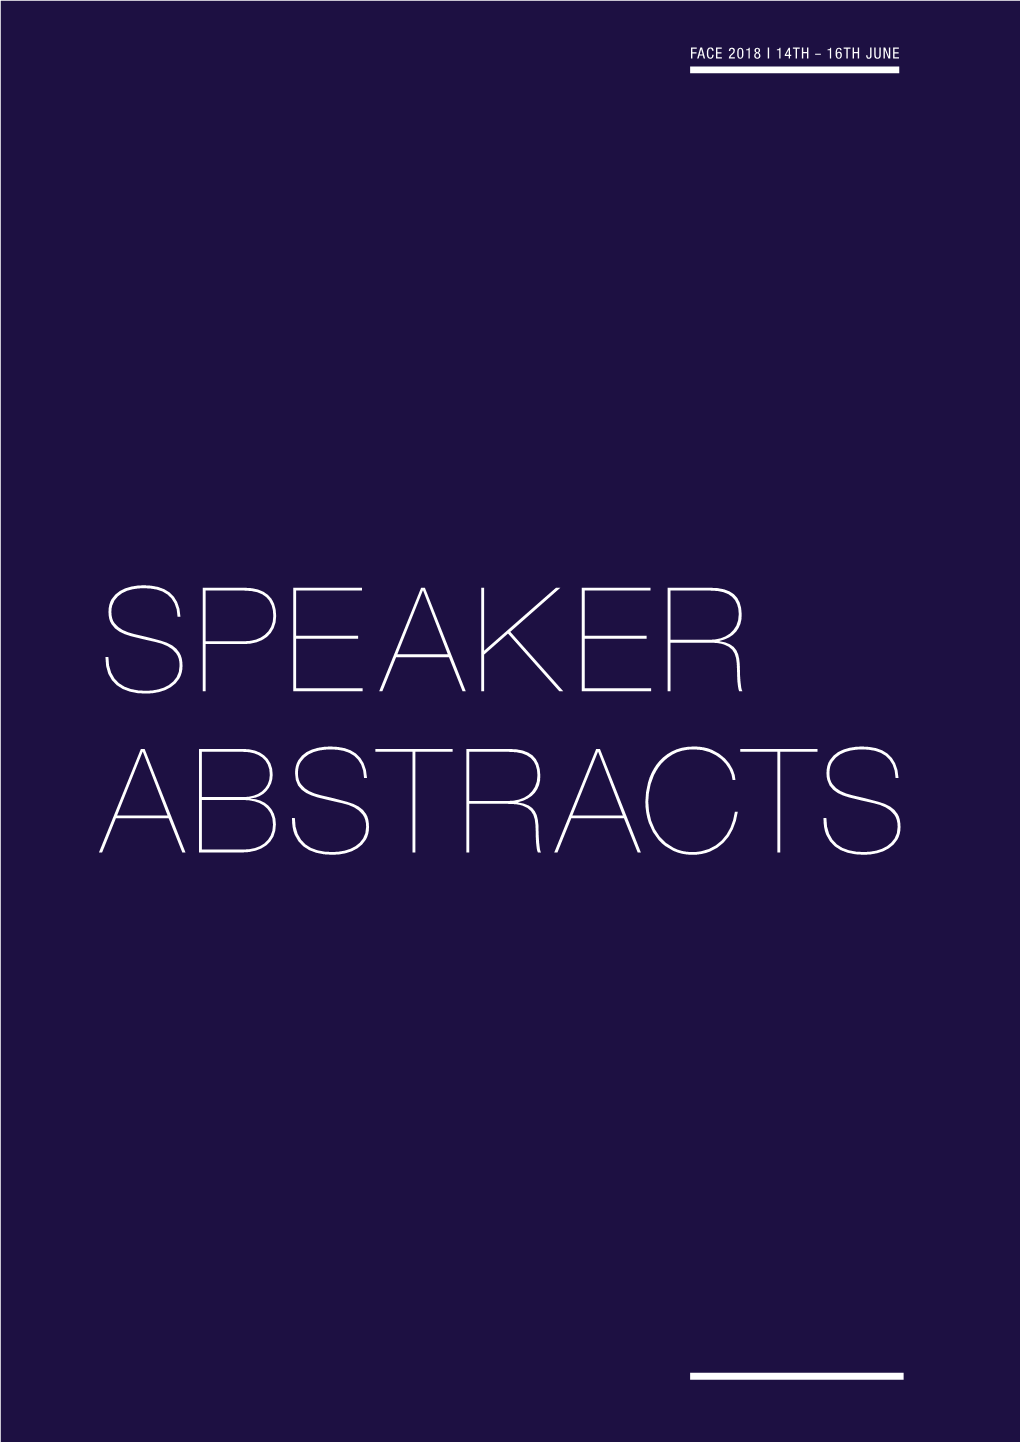 Download FACE 2018 Abstracts